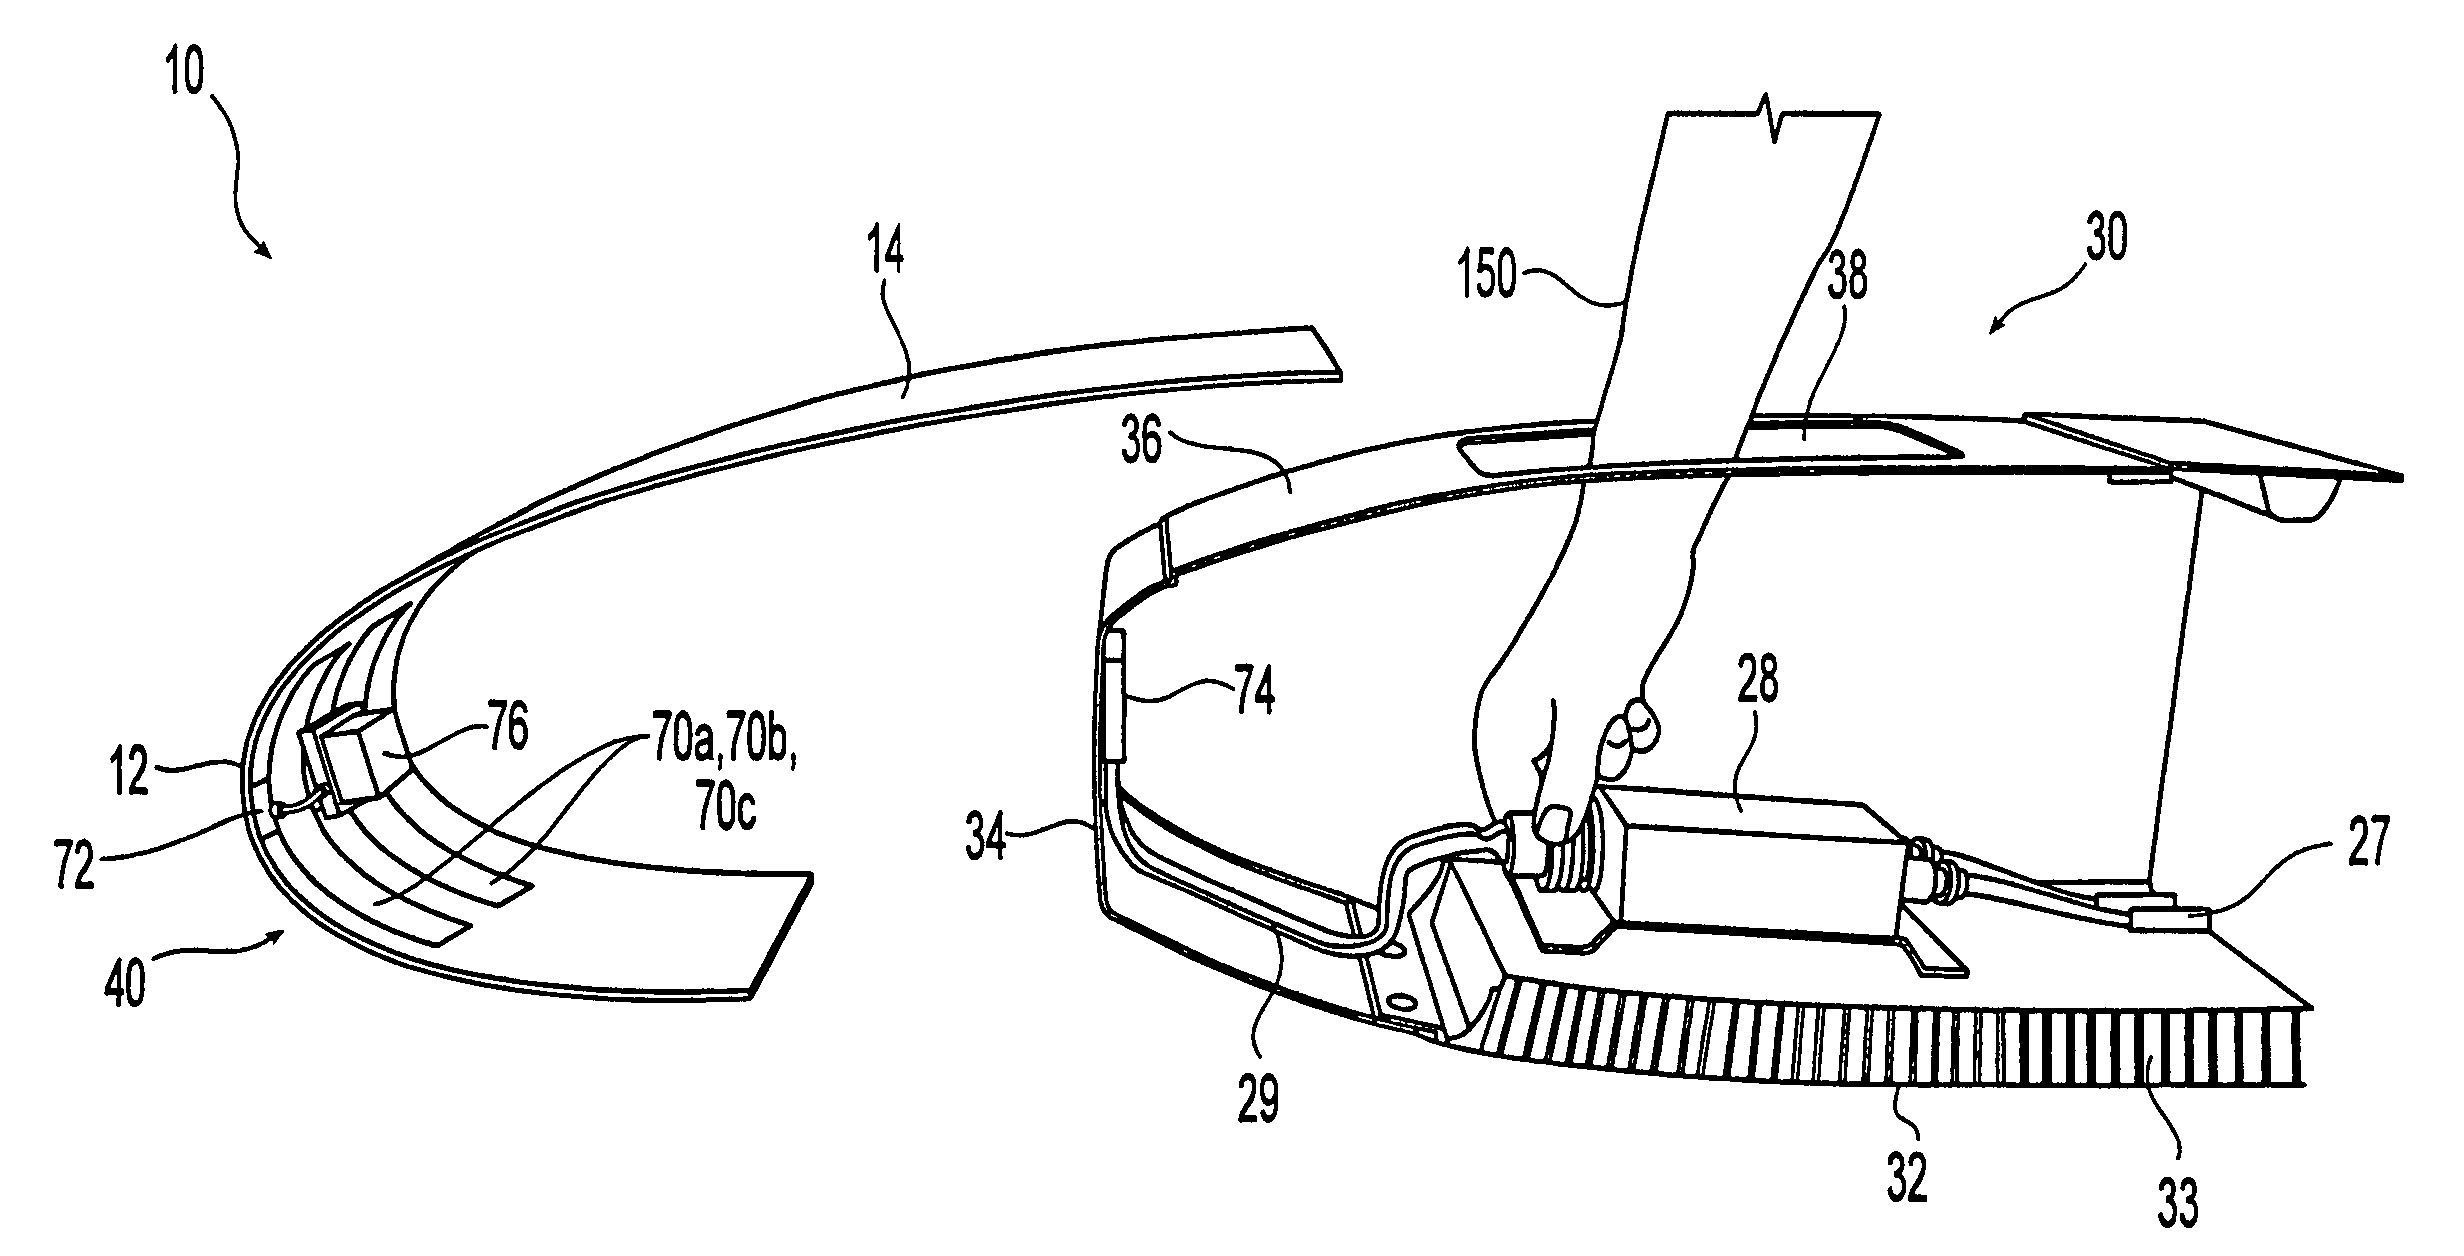 Aircraft engine nacelle inlet having access opening for electrical ice protection system